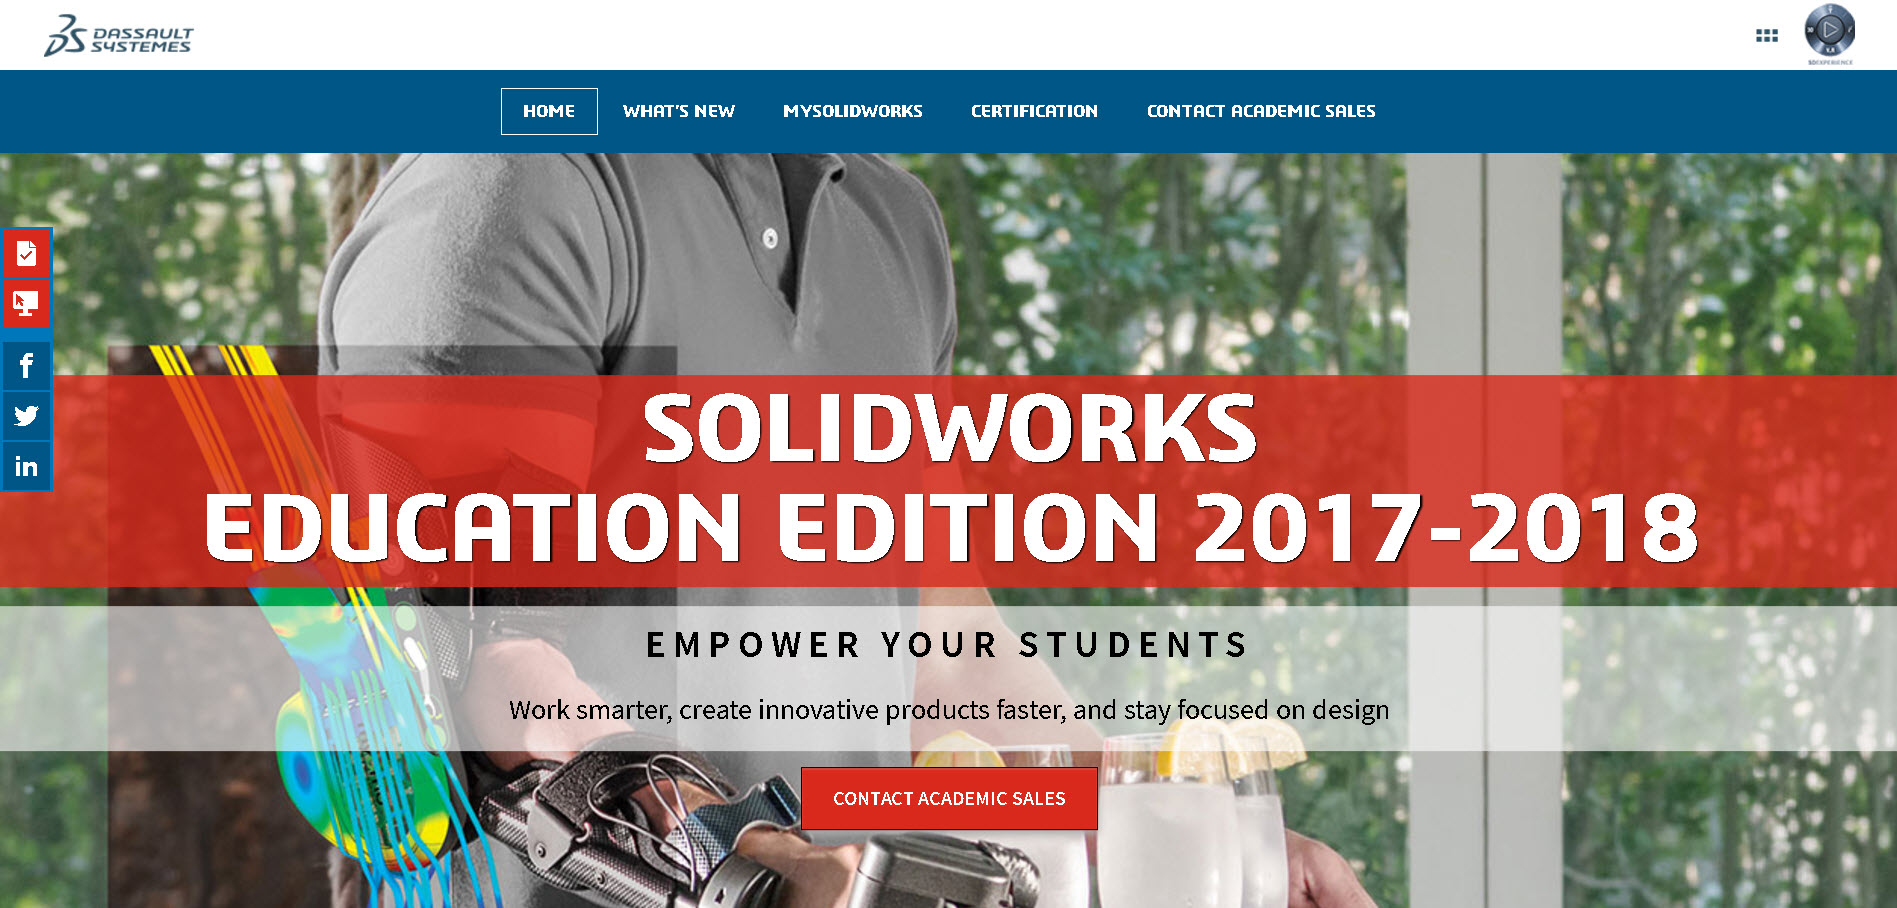 SOLIDWORKS Education Edition 2017-2018